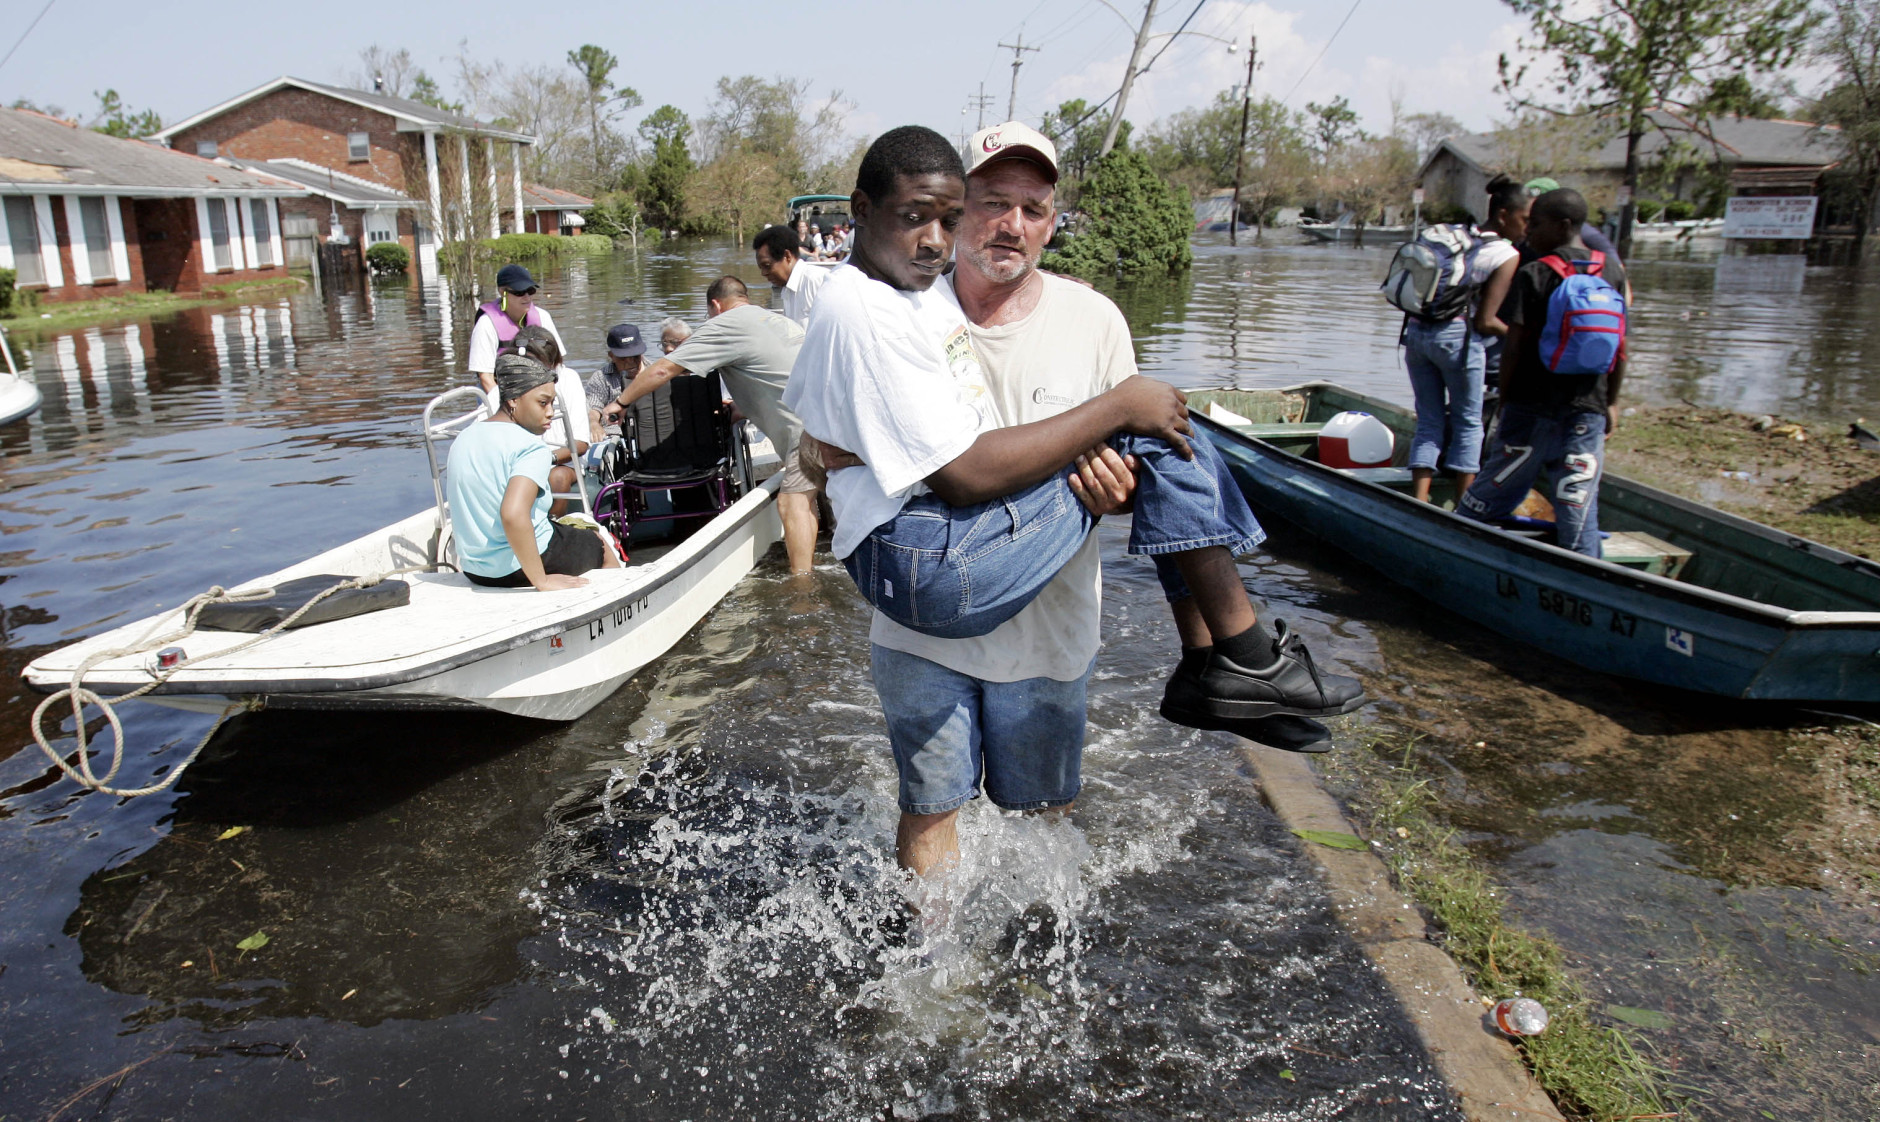 Volunteer Mickey Monceaux carries David Johnson, who could not walk, to safety after he  used his boat to rescue Johnson and other residents from a flooded  neighborhood on the east side of  New Orleans, Wednesday, Aug. 31,  2005. Hurricane Katrina left much of the city under water.  Officials called for a mandatory evacuation of the city, but many residents remained in the city and had to be rescued from flooded homes and hotels.  (AP Photo/Eric Gay)